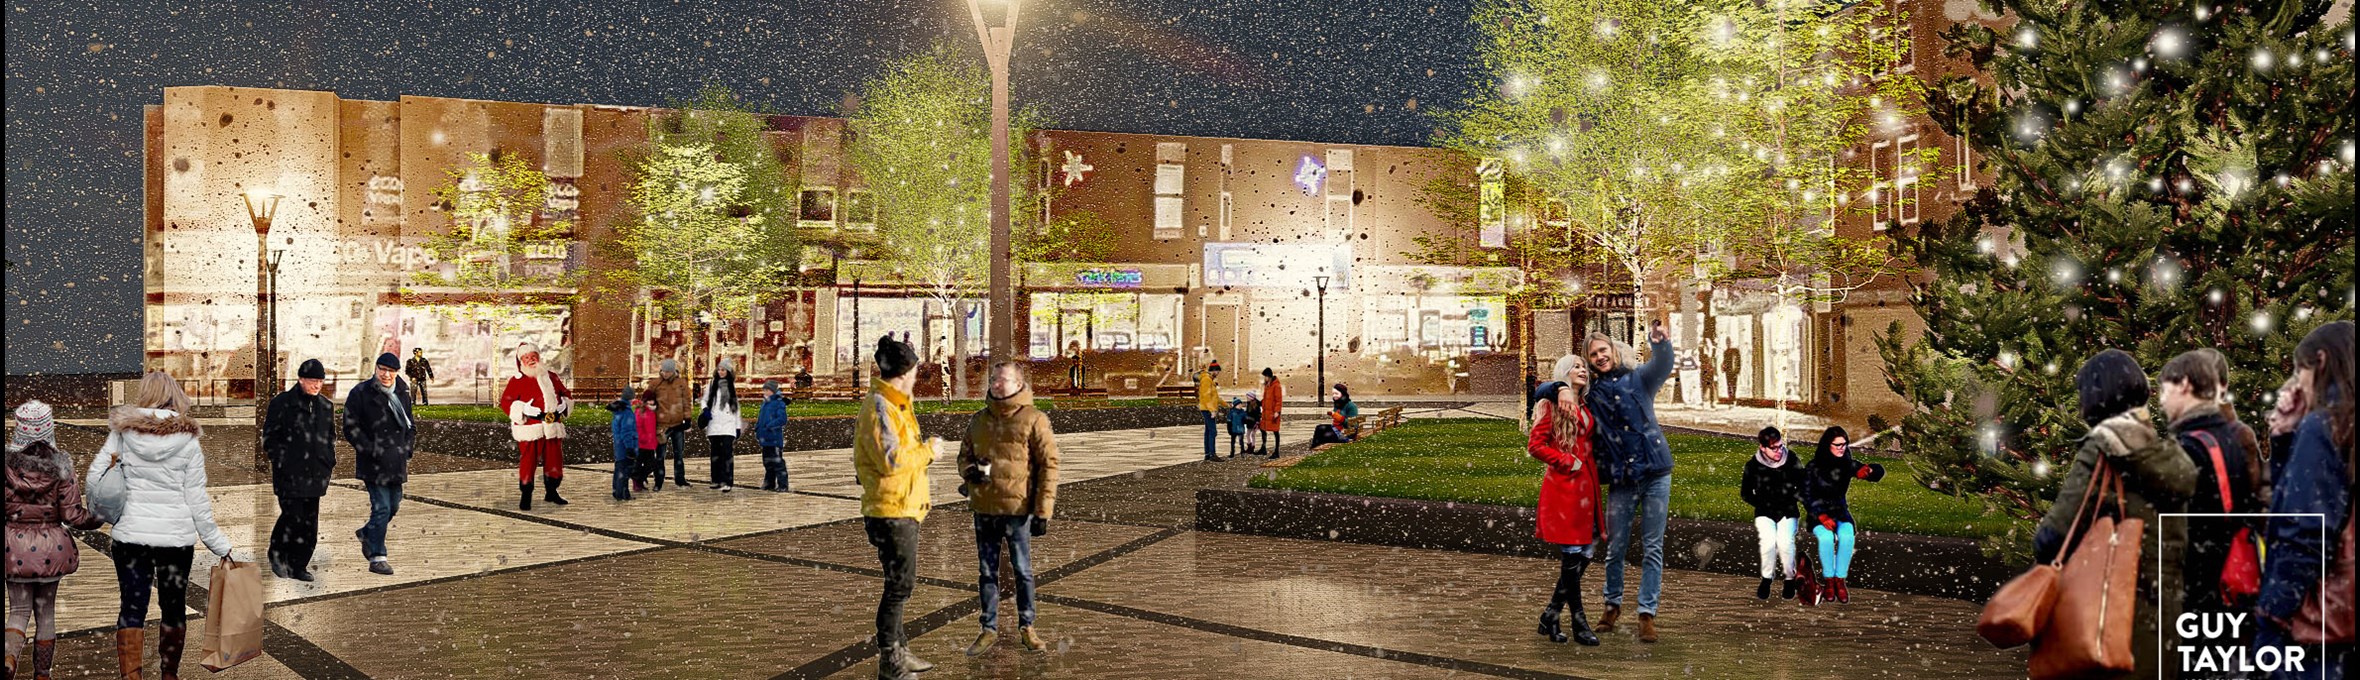 An artist impression of Portland Square in Sutton at Christmas